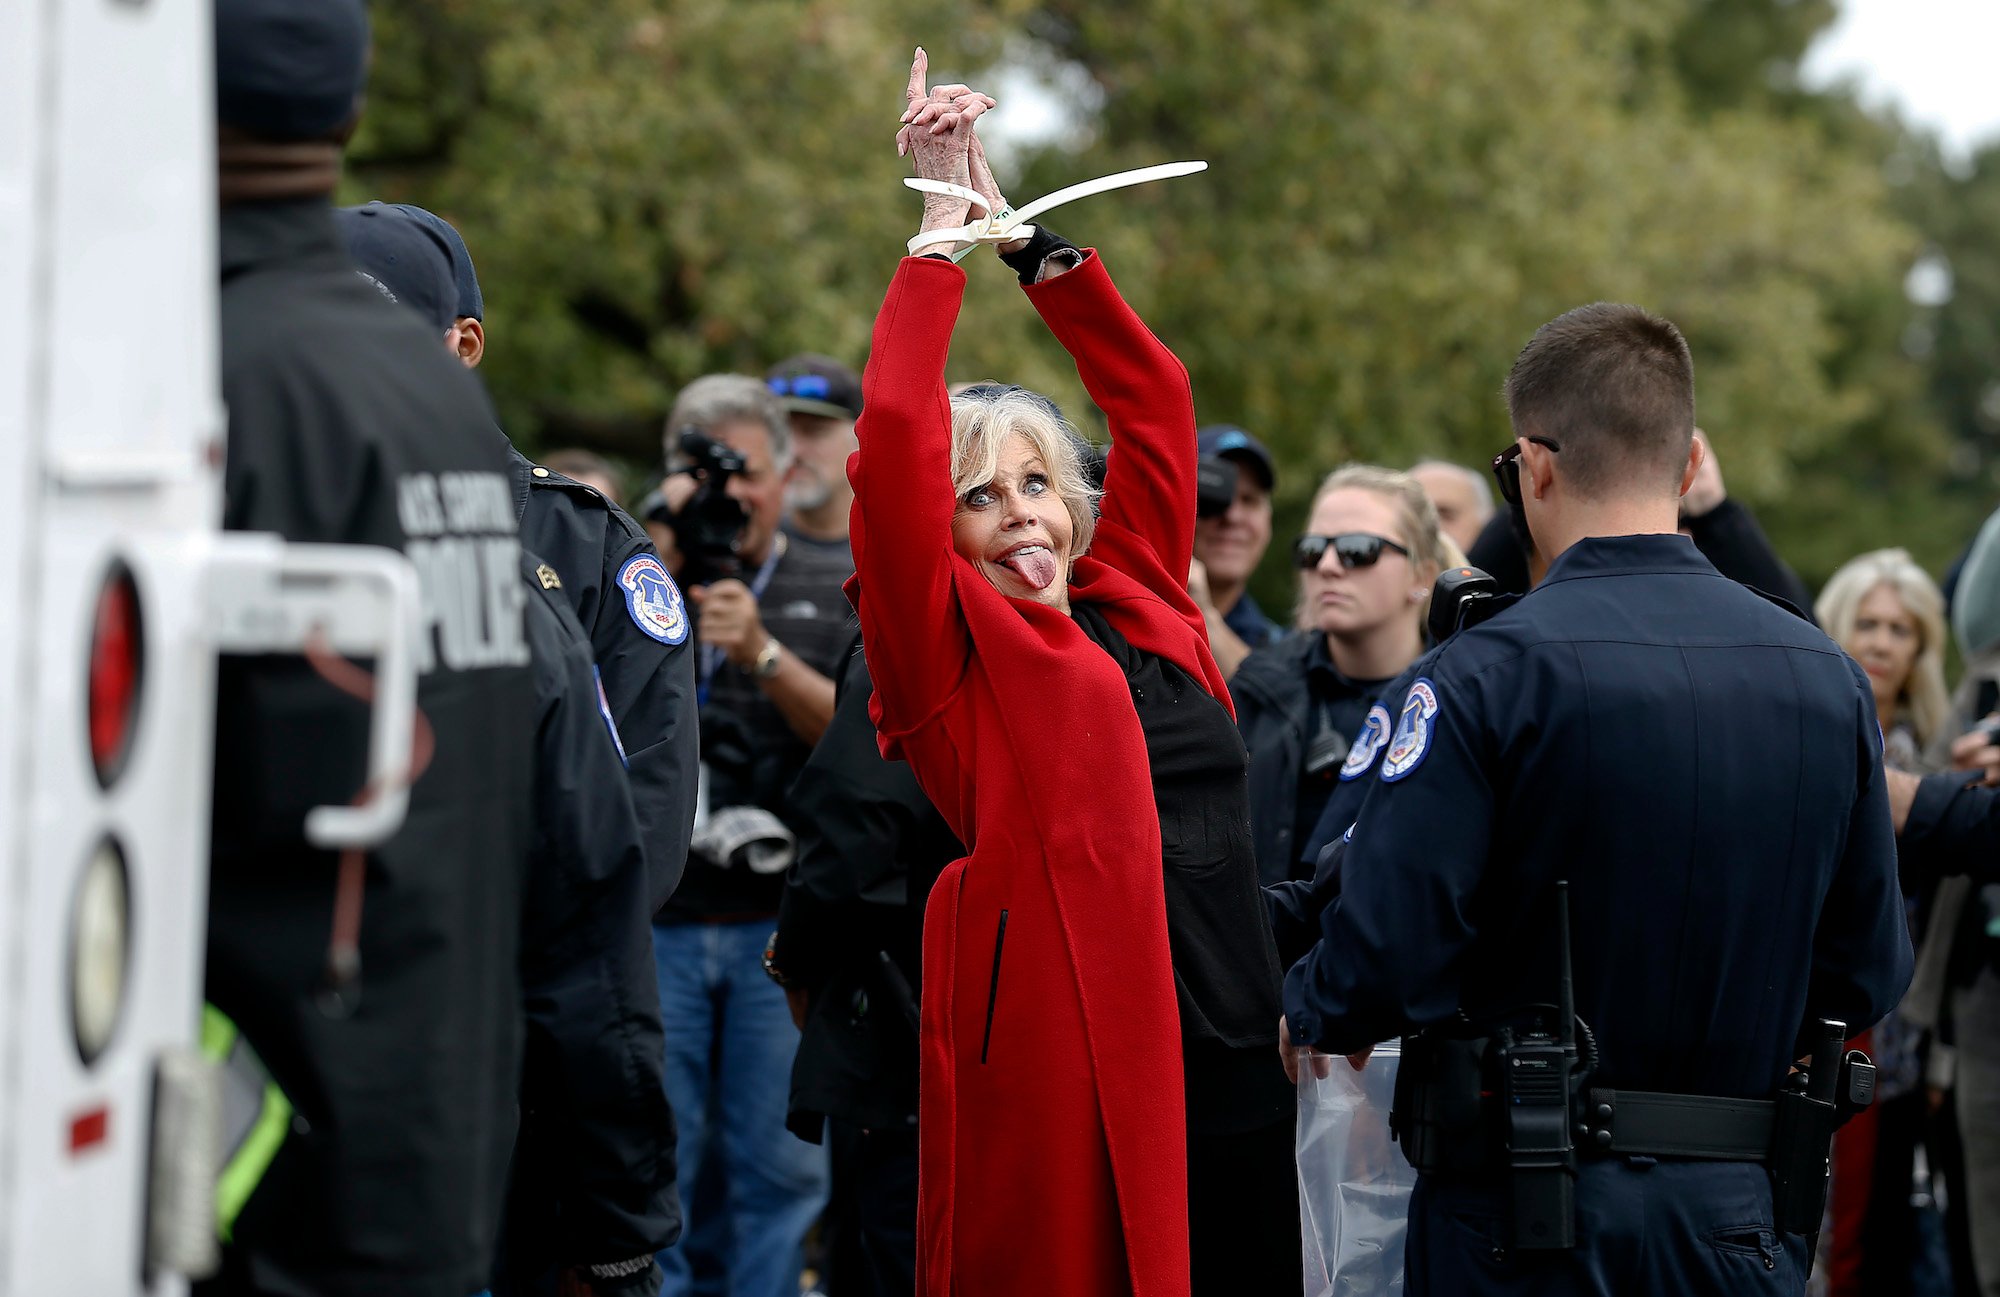 How Many Times Has Jane Fonda Been Arrested?